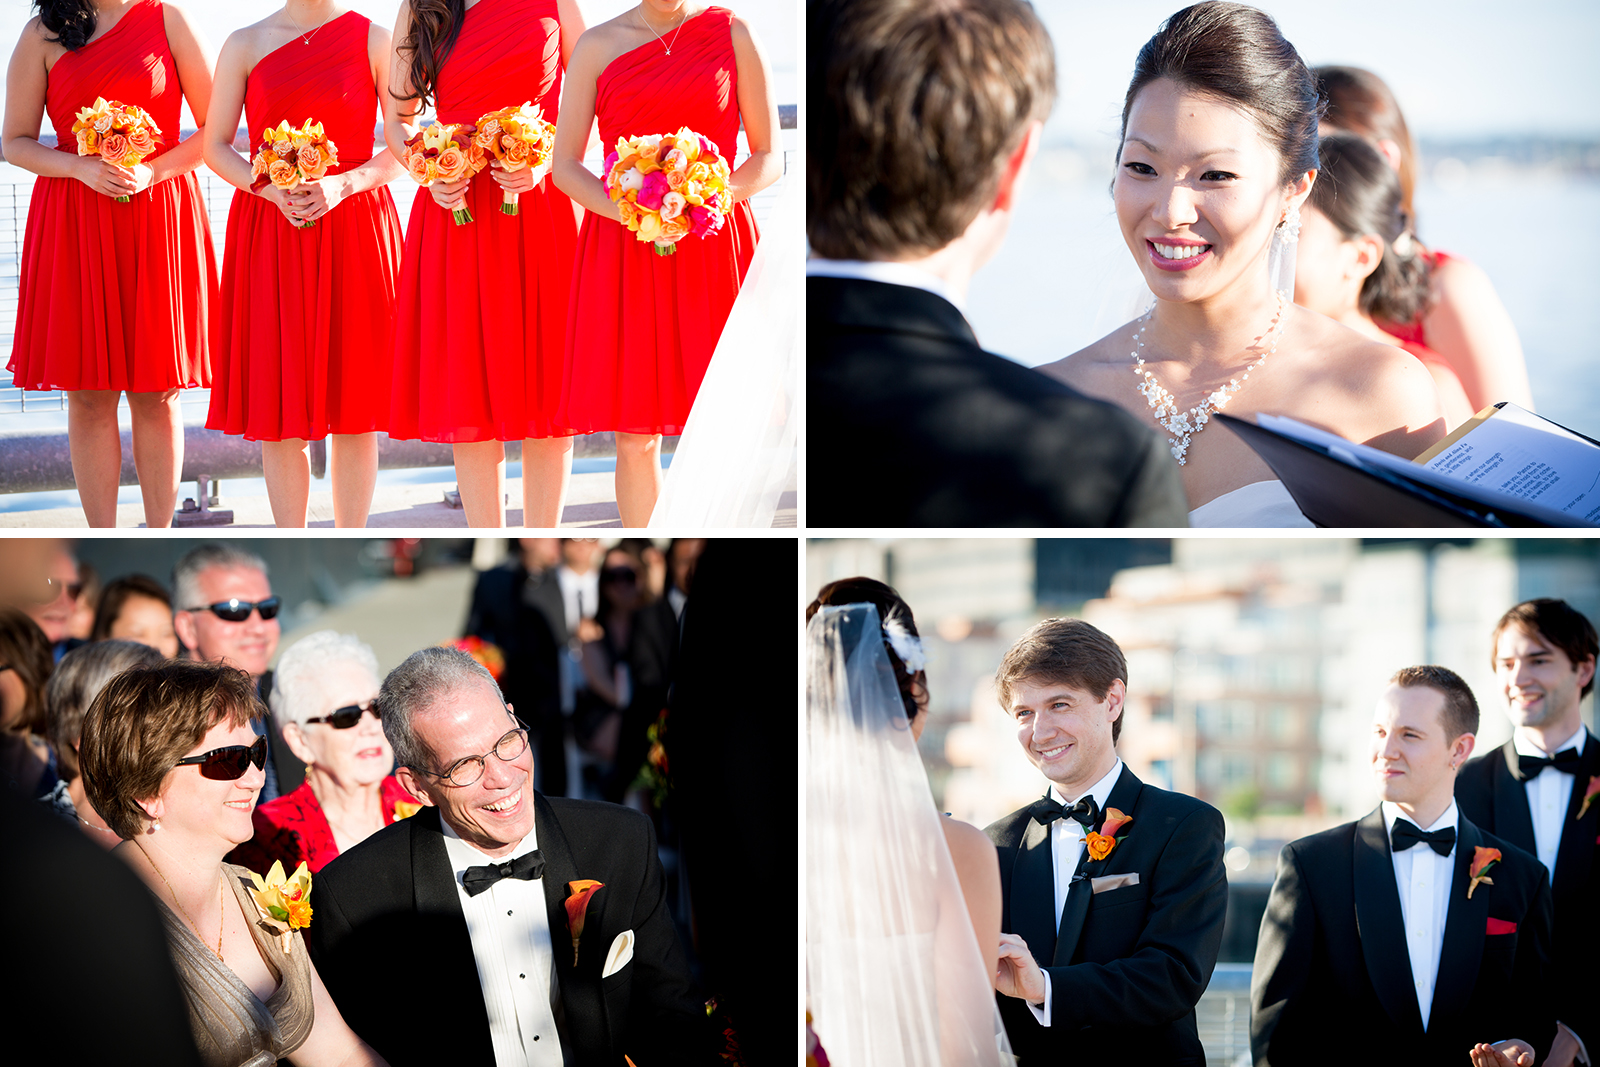 The scenes from the ceremony during the wedding at the Seattle Aquarium. (Wedding Photography by Scott Eklund - Red Box Pictures)